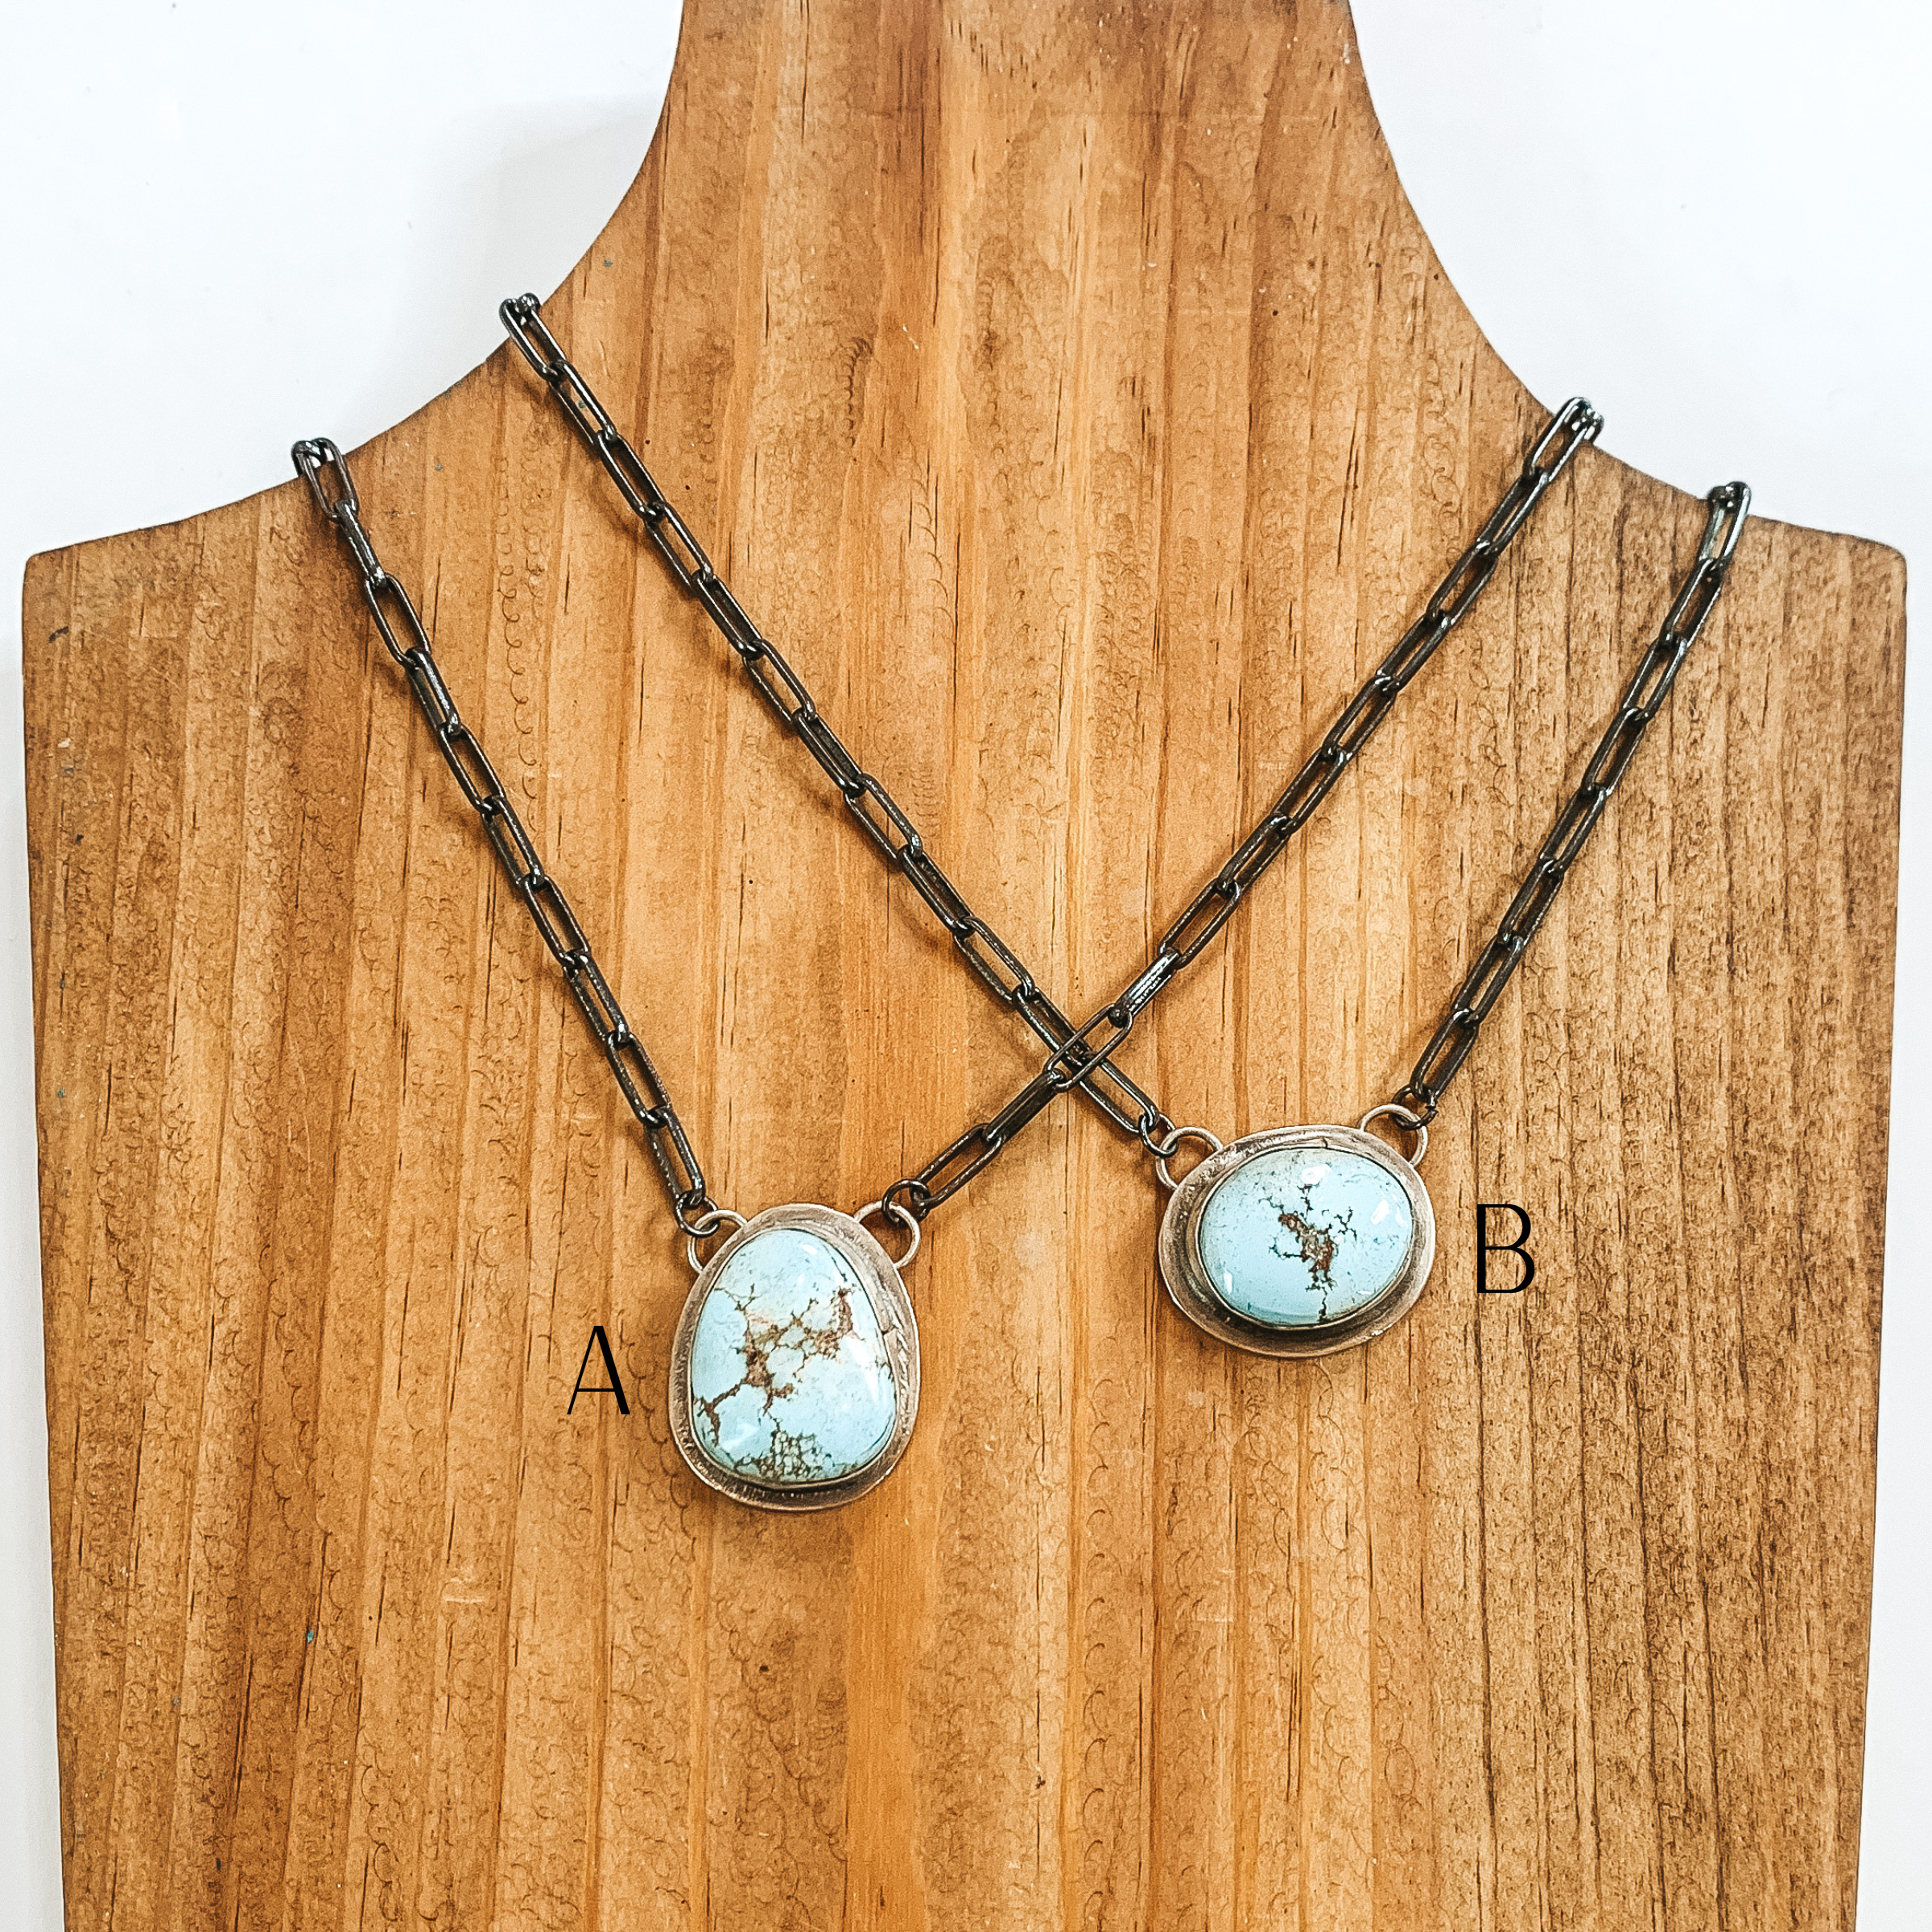 Tony Yazzie | Navajo Handmade Sterling Silver Chain Necklace with Turquoise Stone Pendant - Giddy Up Glamour Boutique